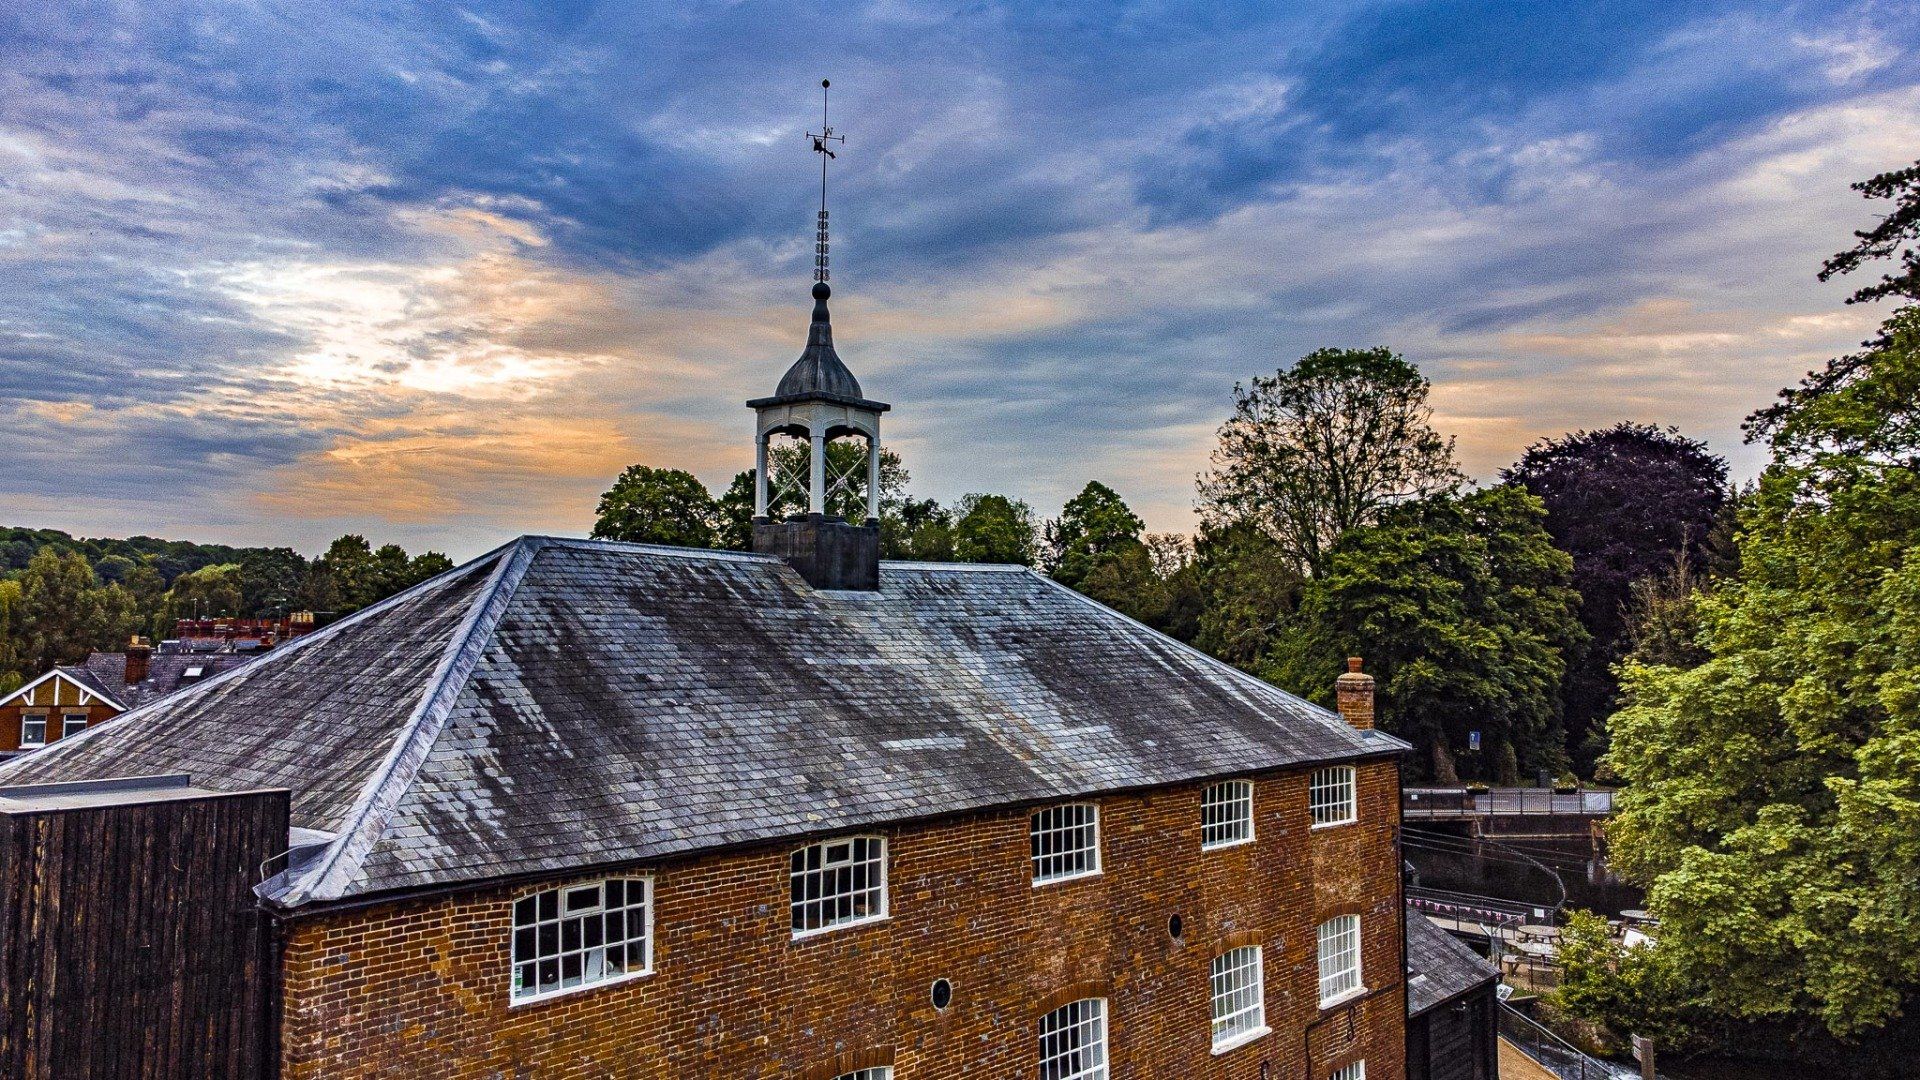 Whitchurch Silk Mill with moody skies